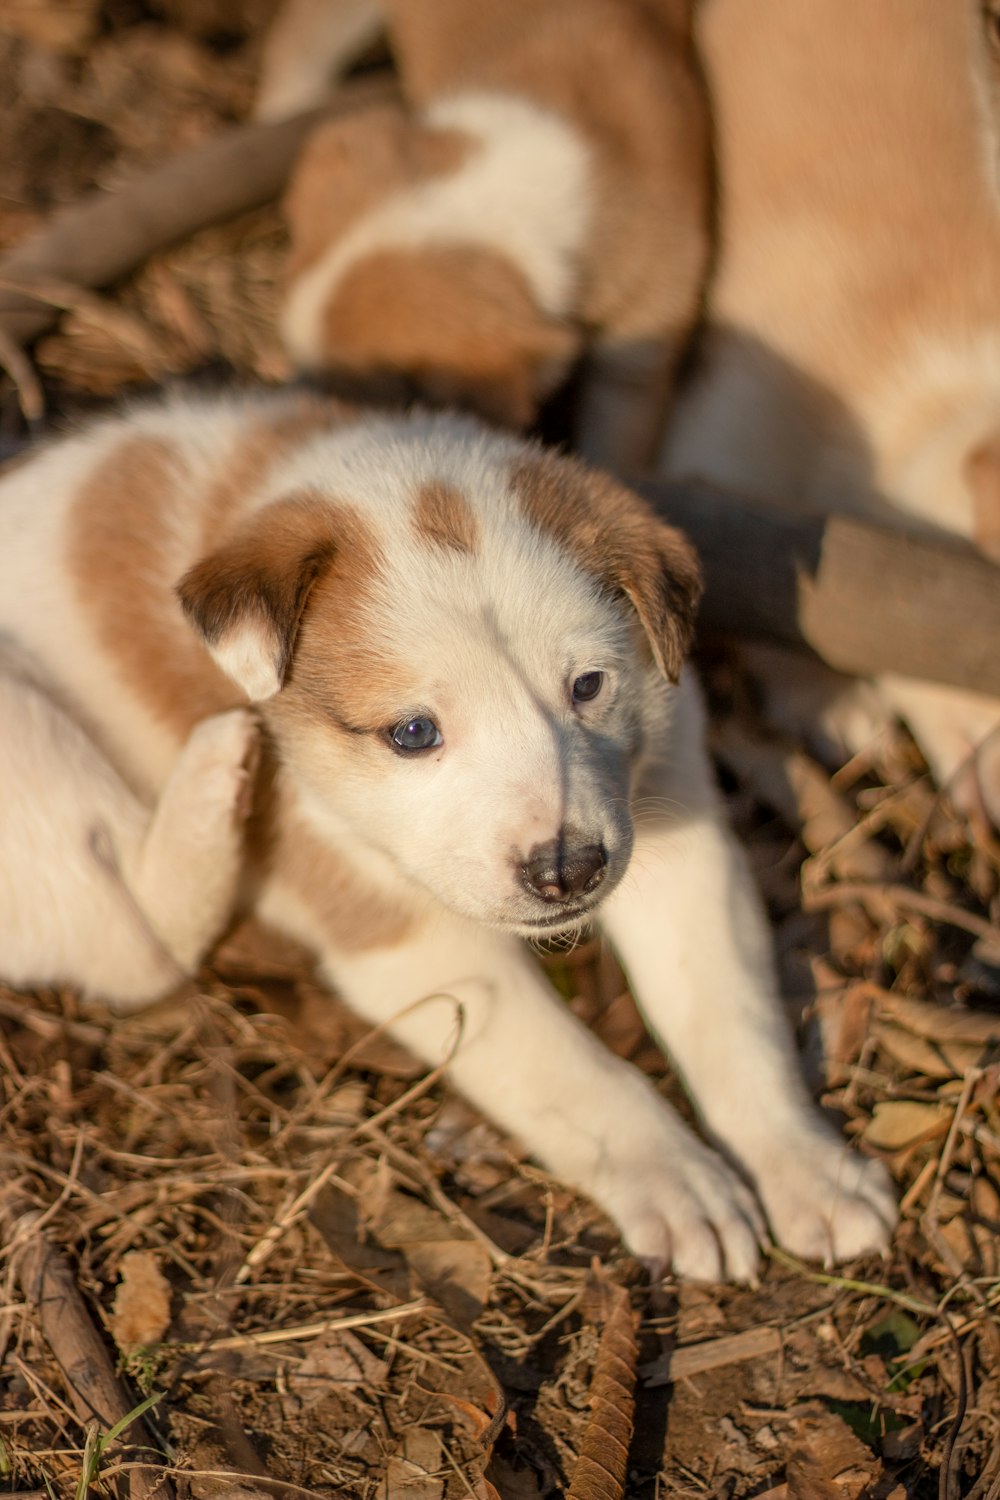 white and brown short coated puppy lying on brown dried leaves